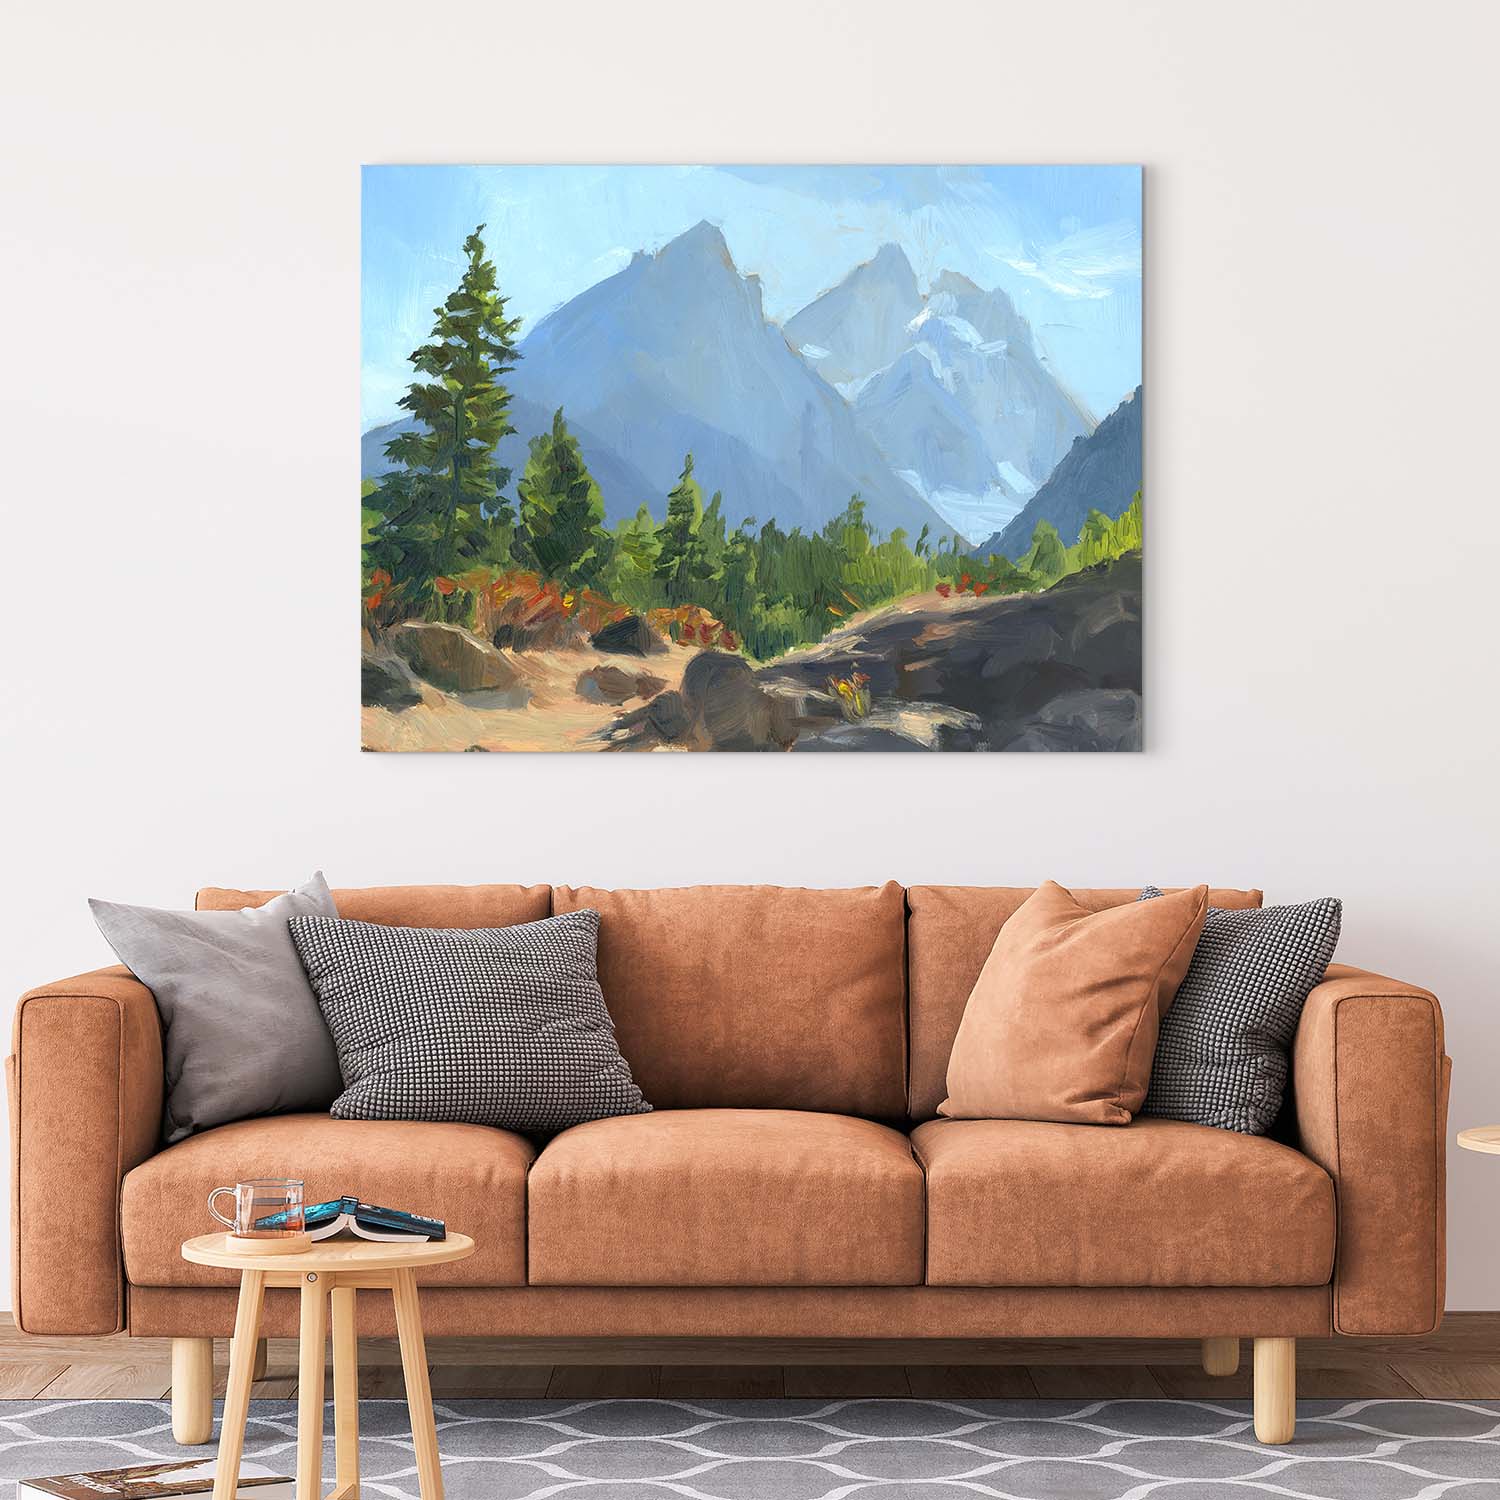 Late Autumn in the Tetons - Canvas Print by Emma Kelly | Art Bloom Canvas Art